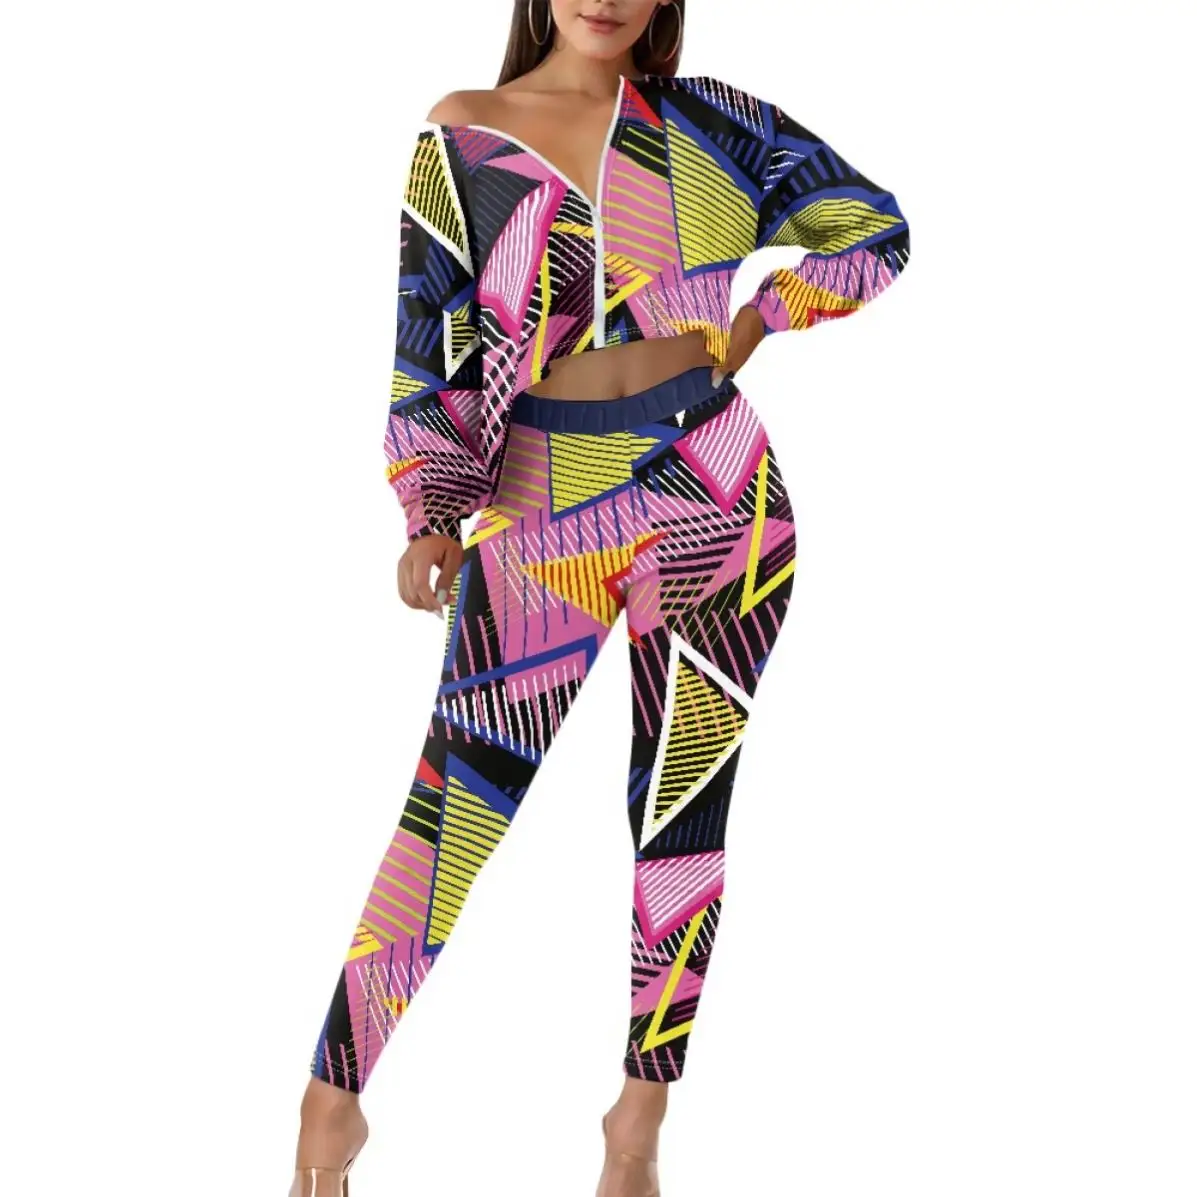 Hot Selling Ladies Winter Long Sleeves Zipper Cropped Yoga Pants Casual Coat Sports Two-piece Suit Tracksuit Luxury Women's Sets